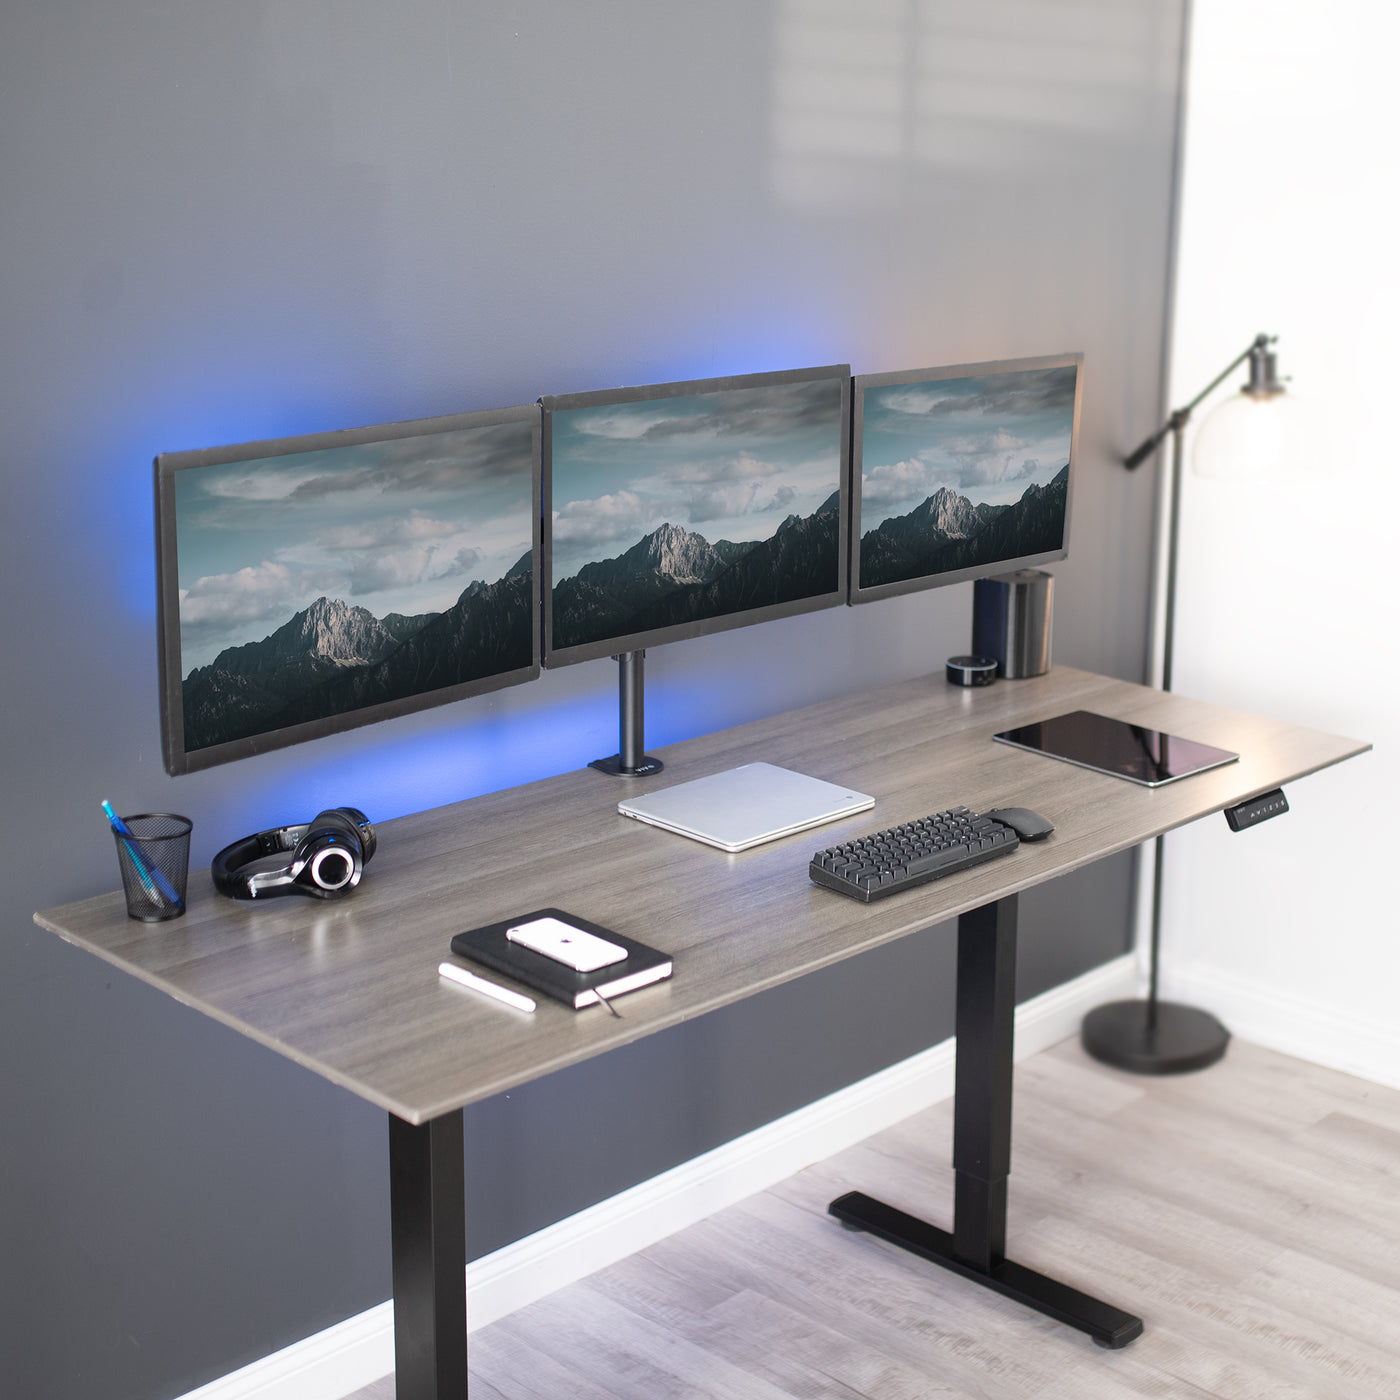 Sturdy flush to wall height adjustable triple monitor desk mount.